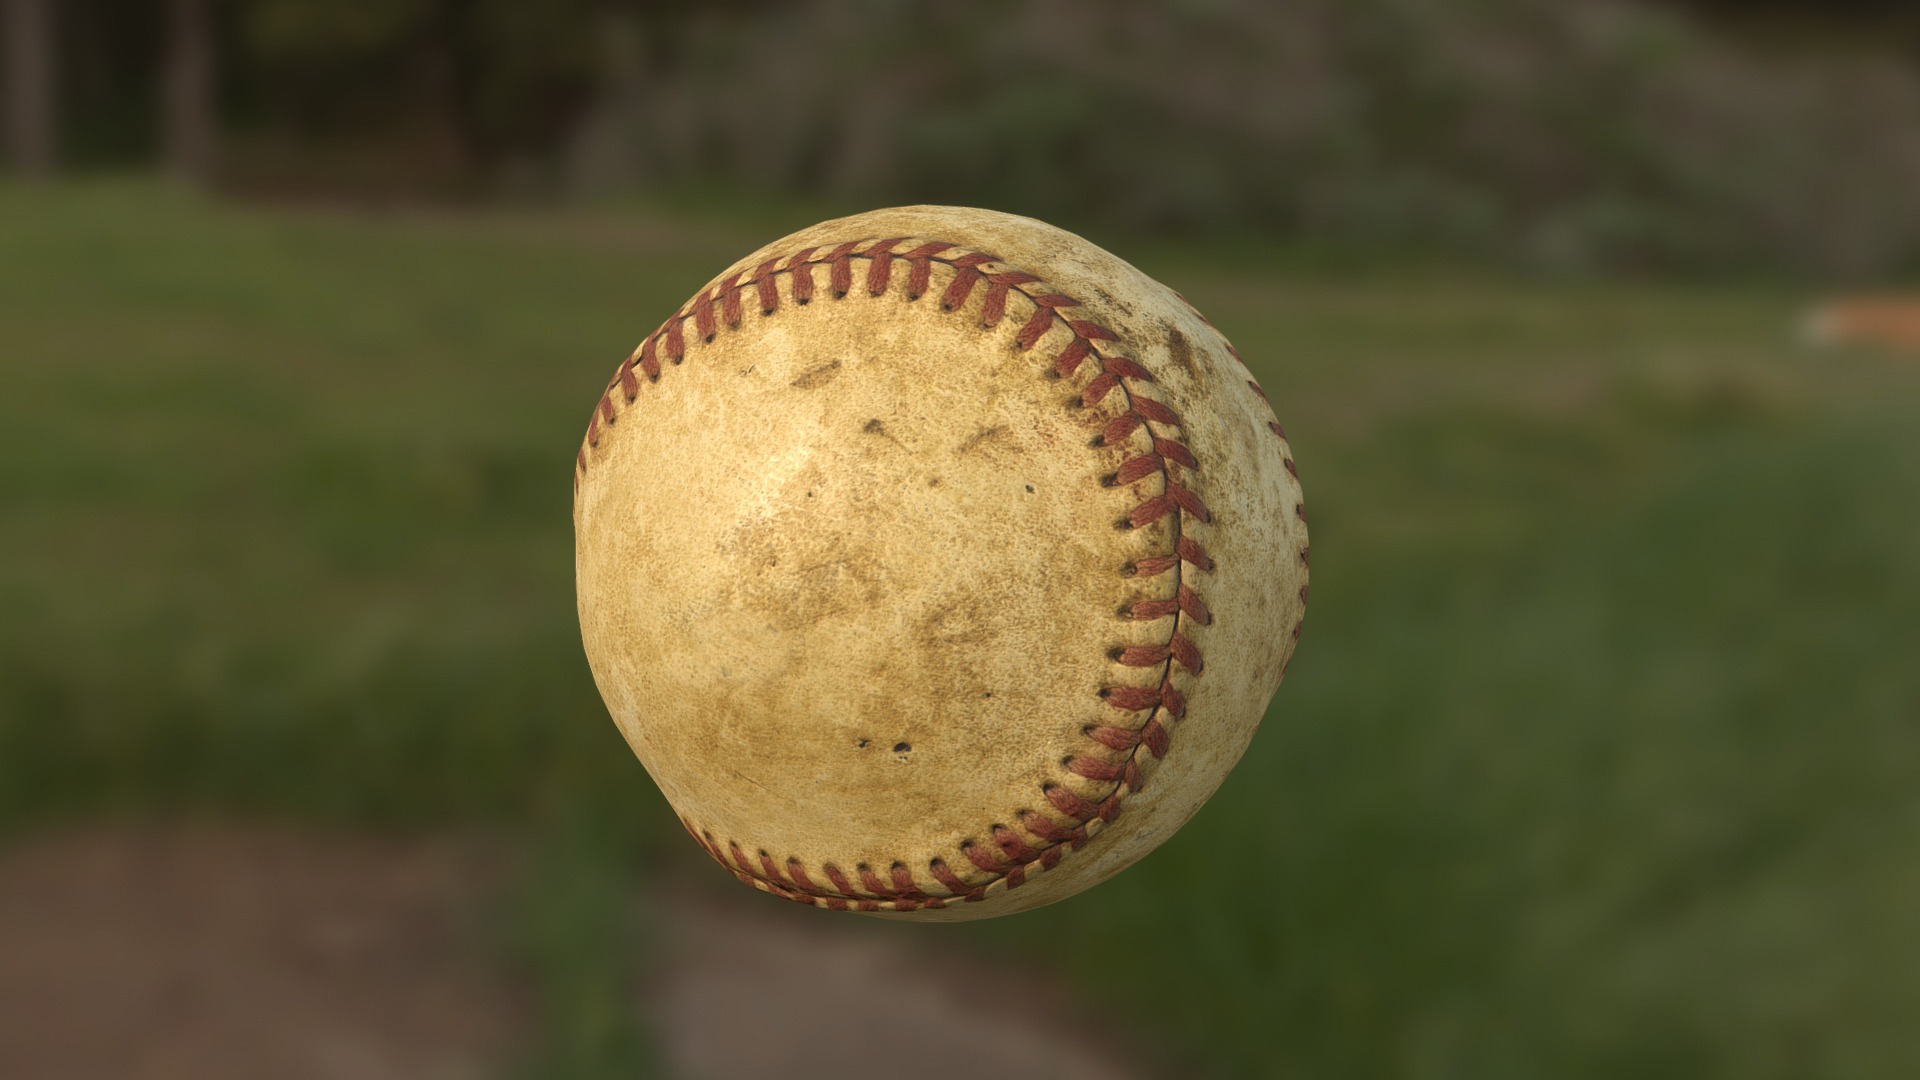 3D model Baseball, Old and Bruised - This is a 3D model of the Baseball, Old and Bruised. The 3D model is about a baseball on a field.